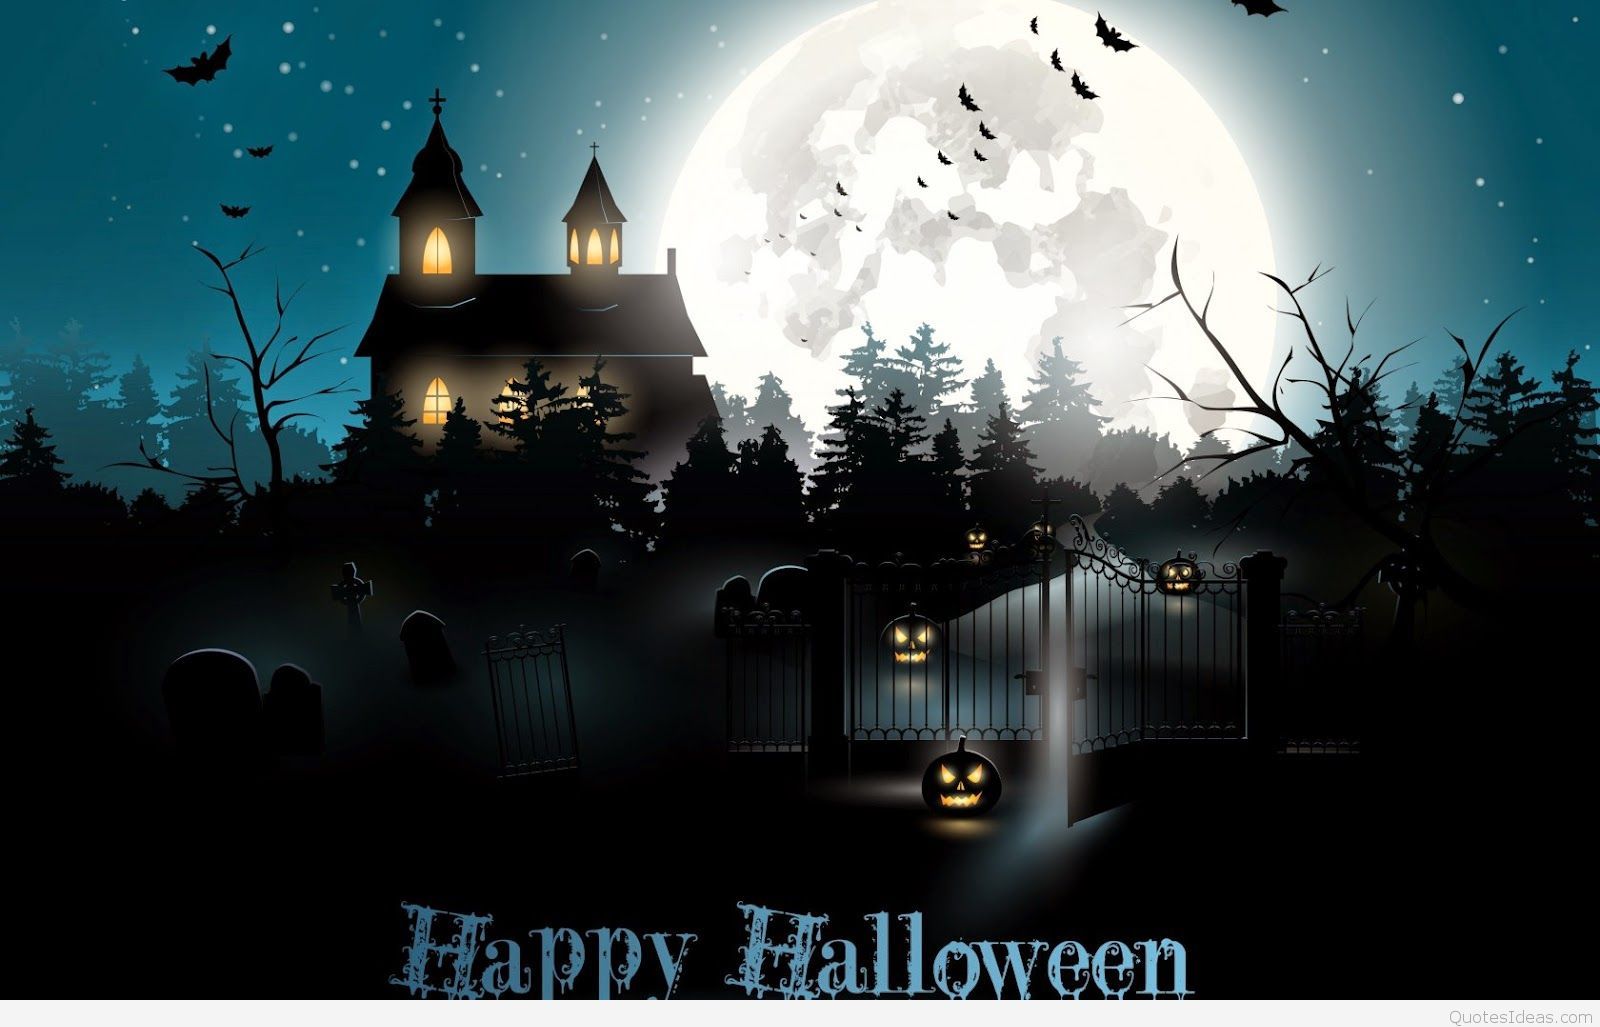 Scary Halloween day wish with background